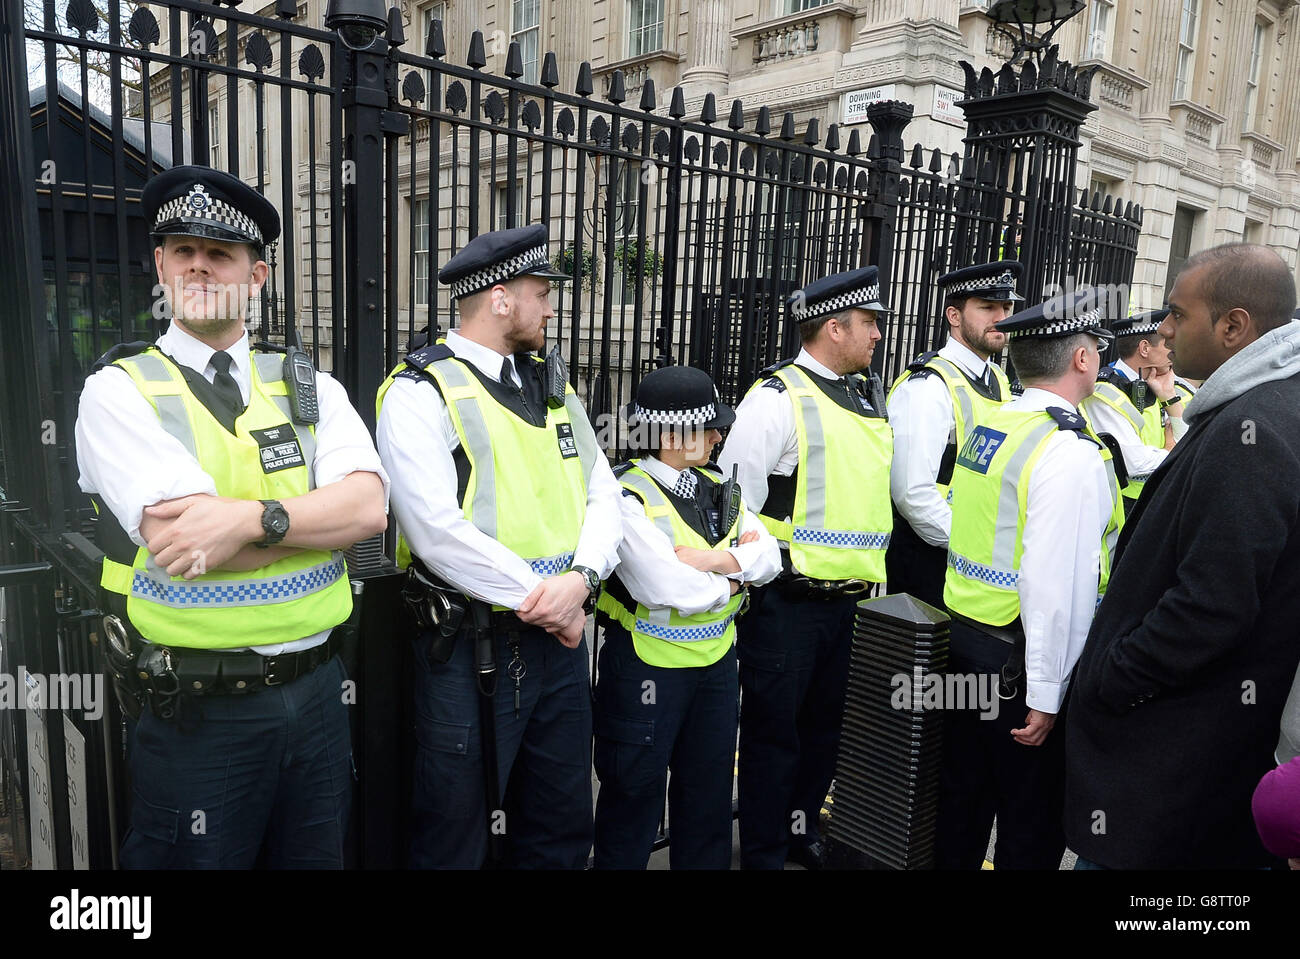 Police officers stand outside the gates of Downing Street in London as protesters gather to call for the resignation of Prime Minister David Cameron in the wake of the Mossack Fonseca data leak. Stock Photo